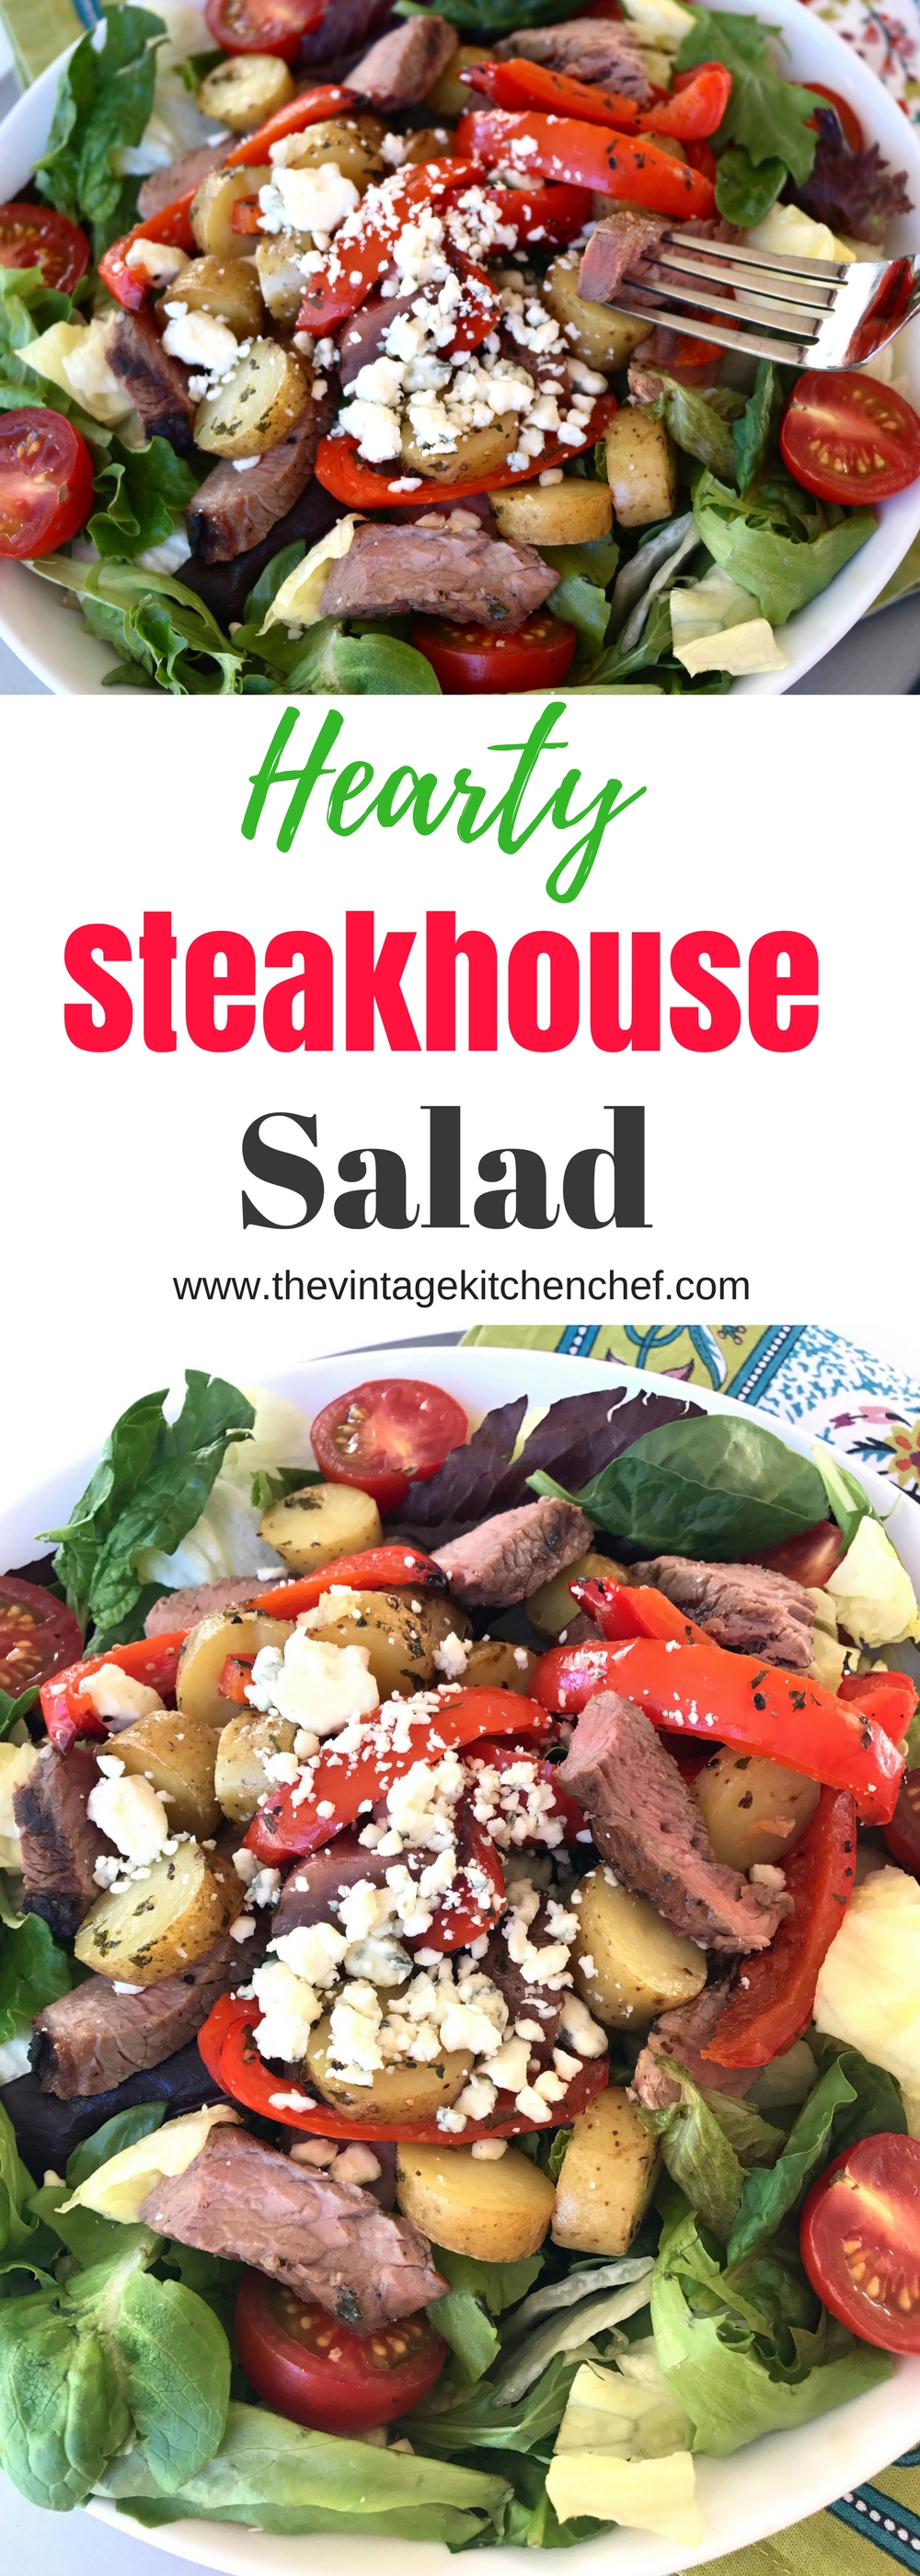 Hearty Steakhouse Salad is a real meat and potatoes meal! This yummy salad has all the flavors of your favorite steakhouse meal.